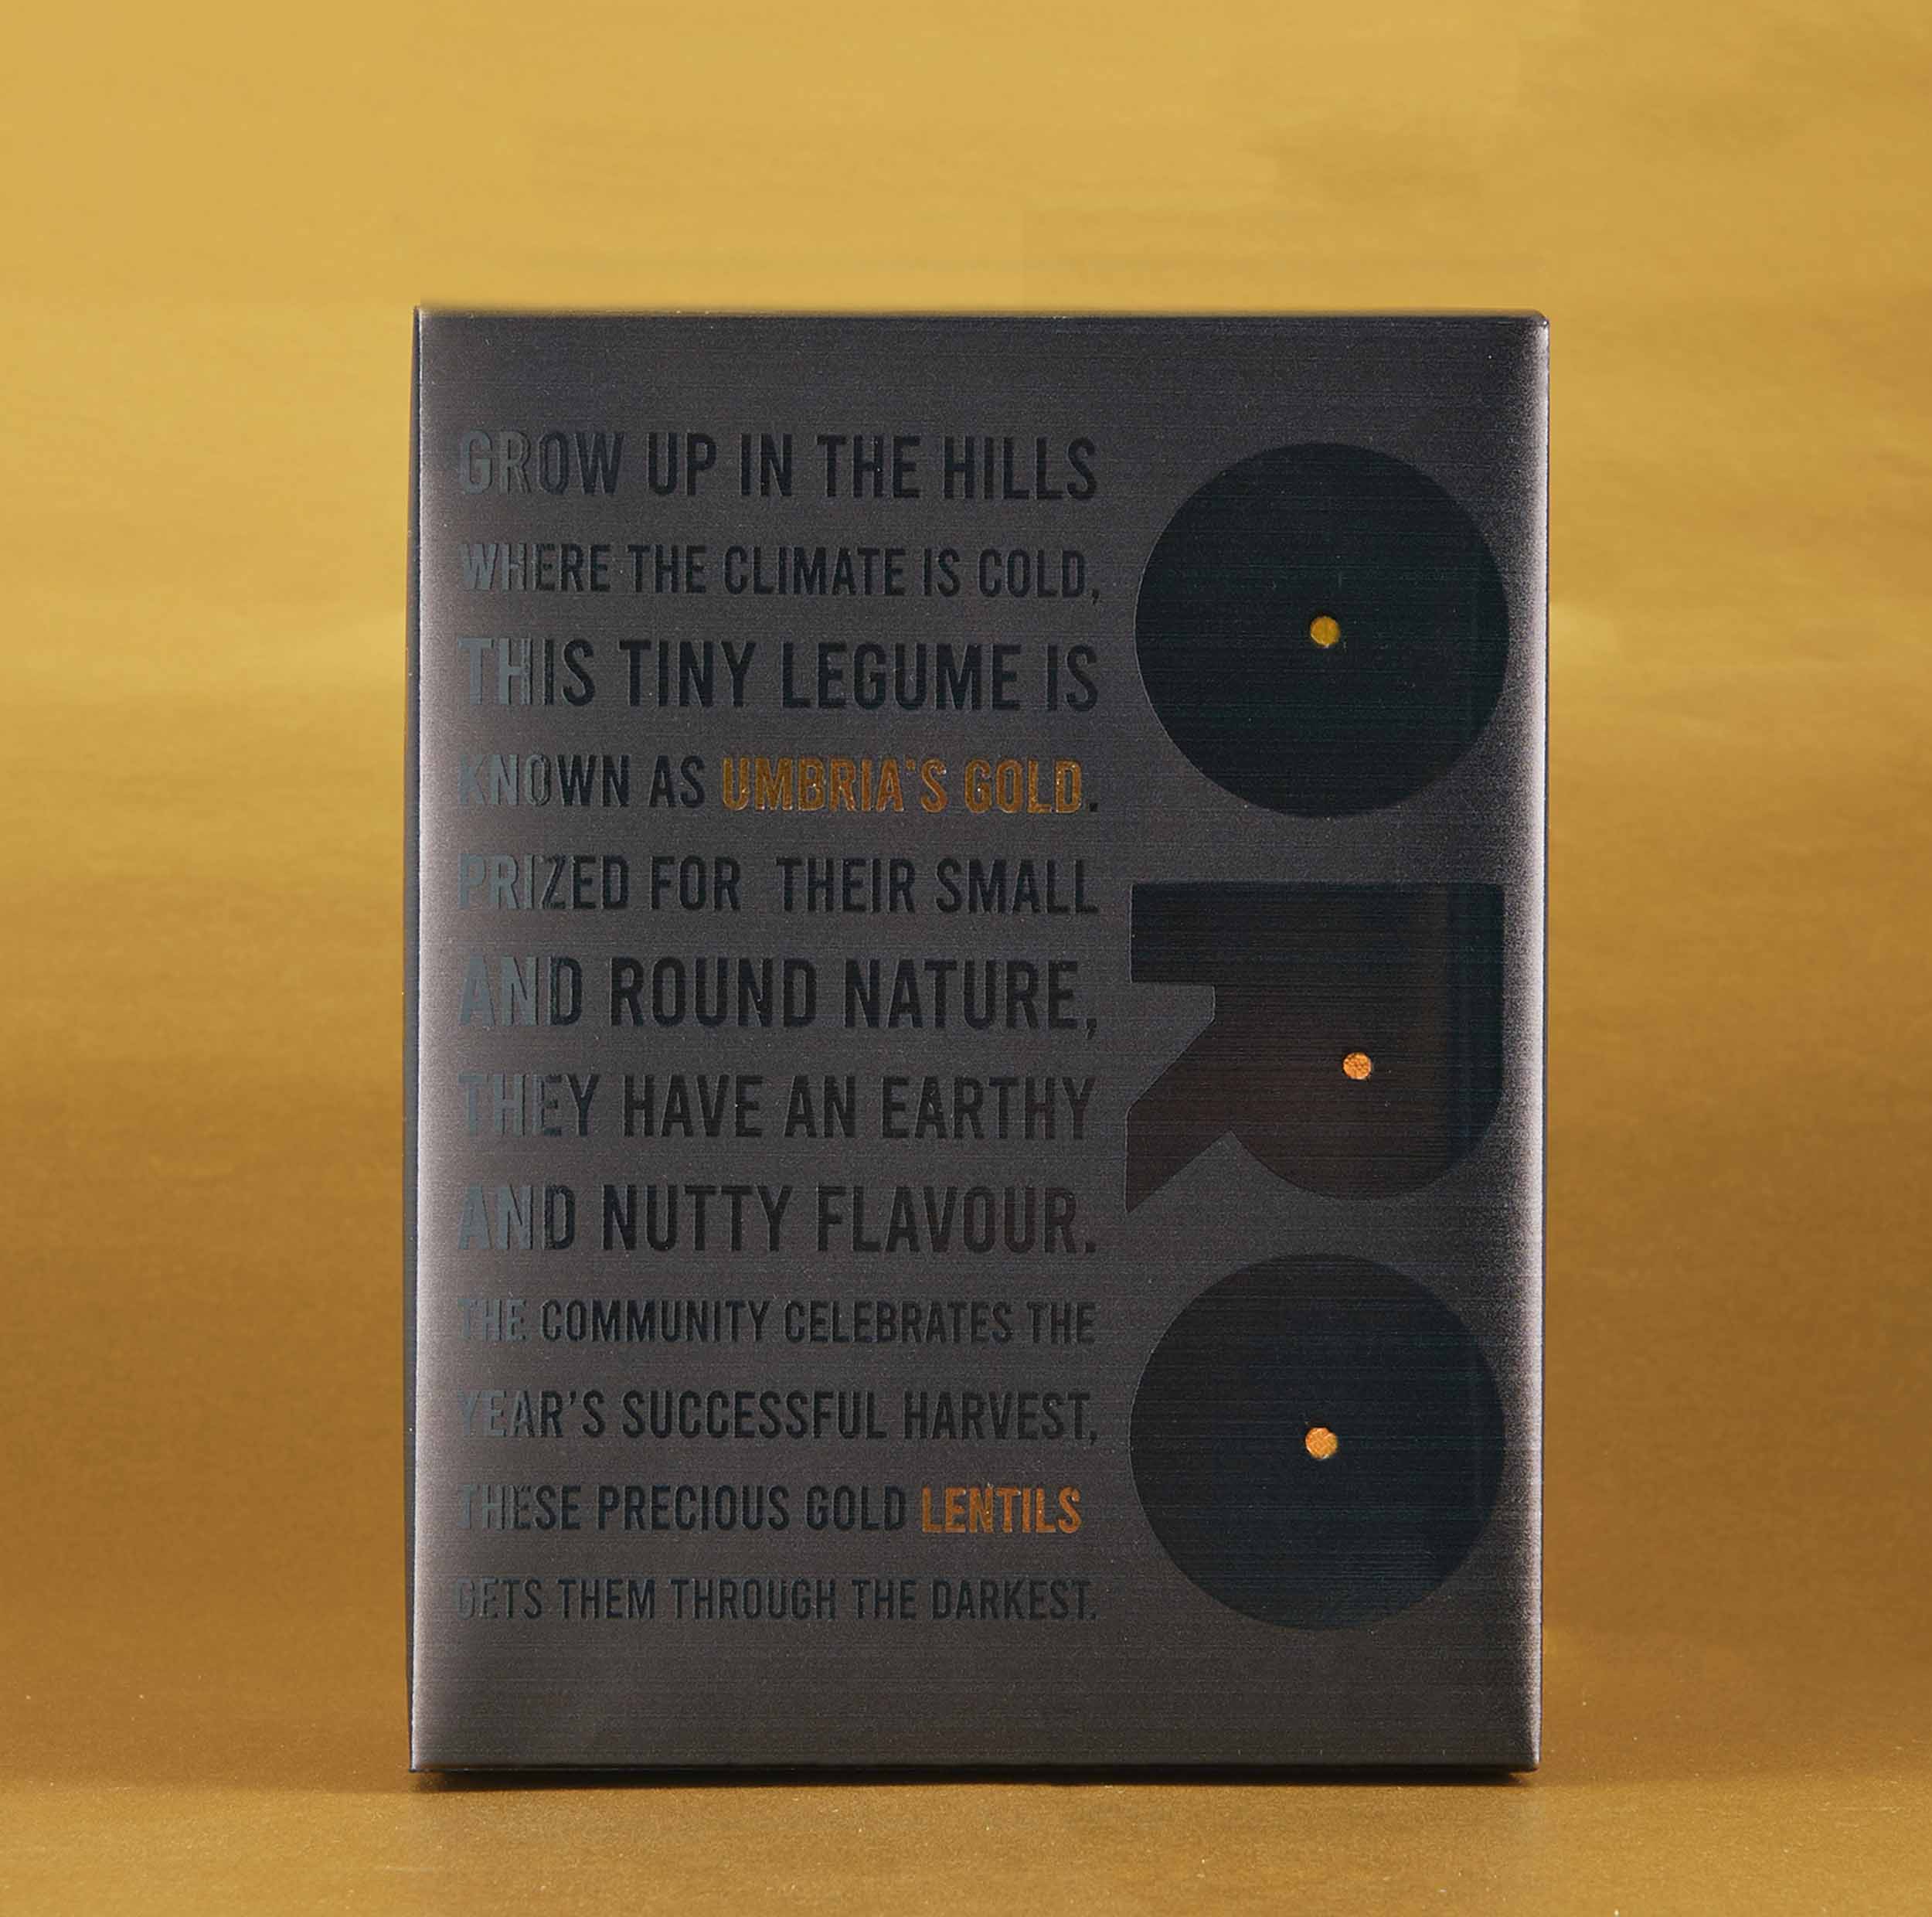 A photograph of premium lentil packaging sold to aid those effected by the earthquakes in Italy, black text on black packaging with orange text highlights.